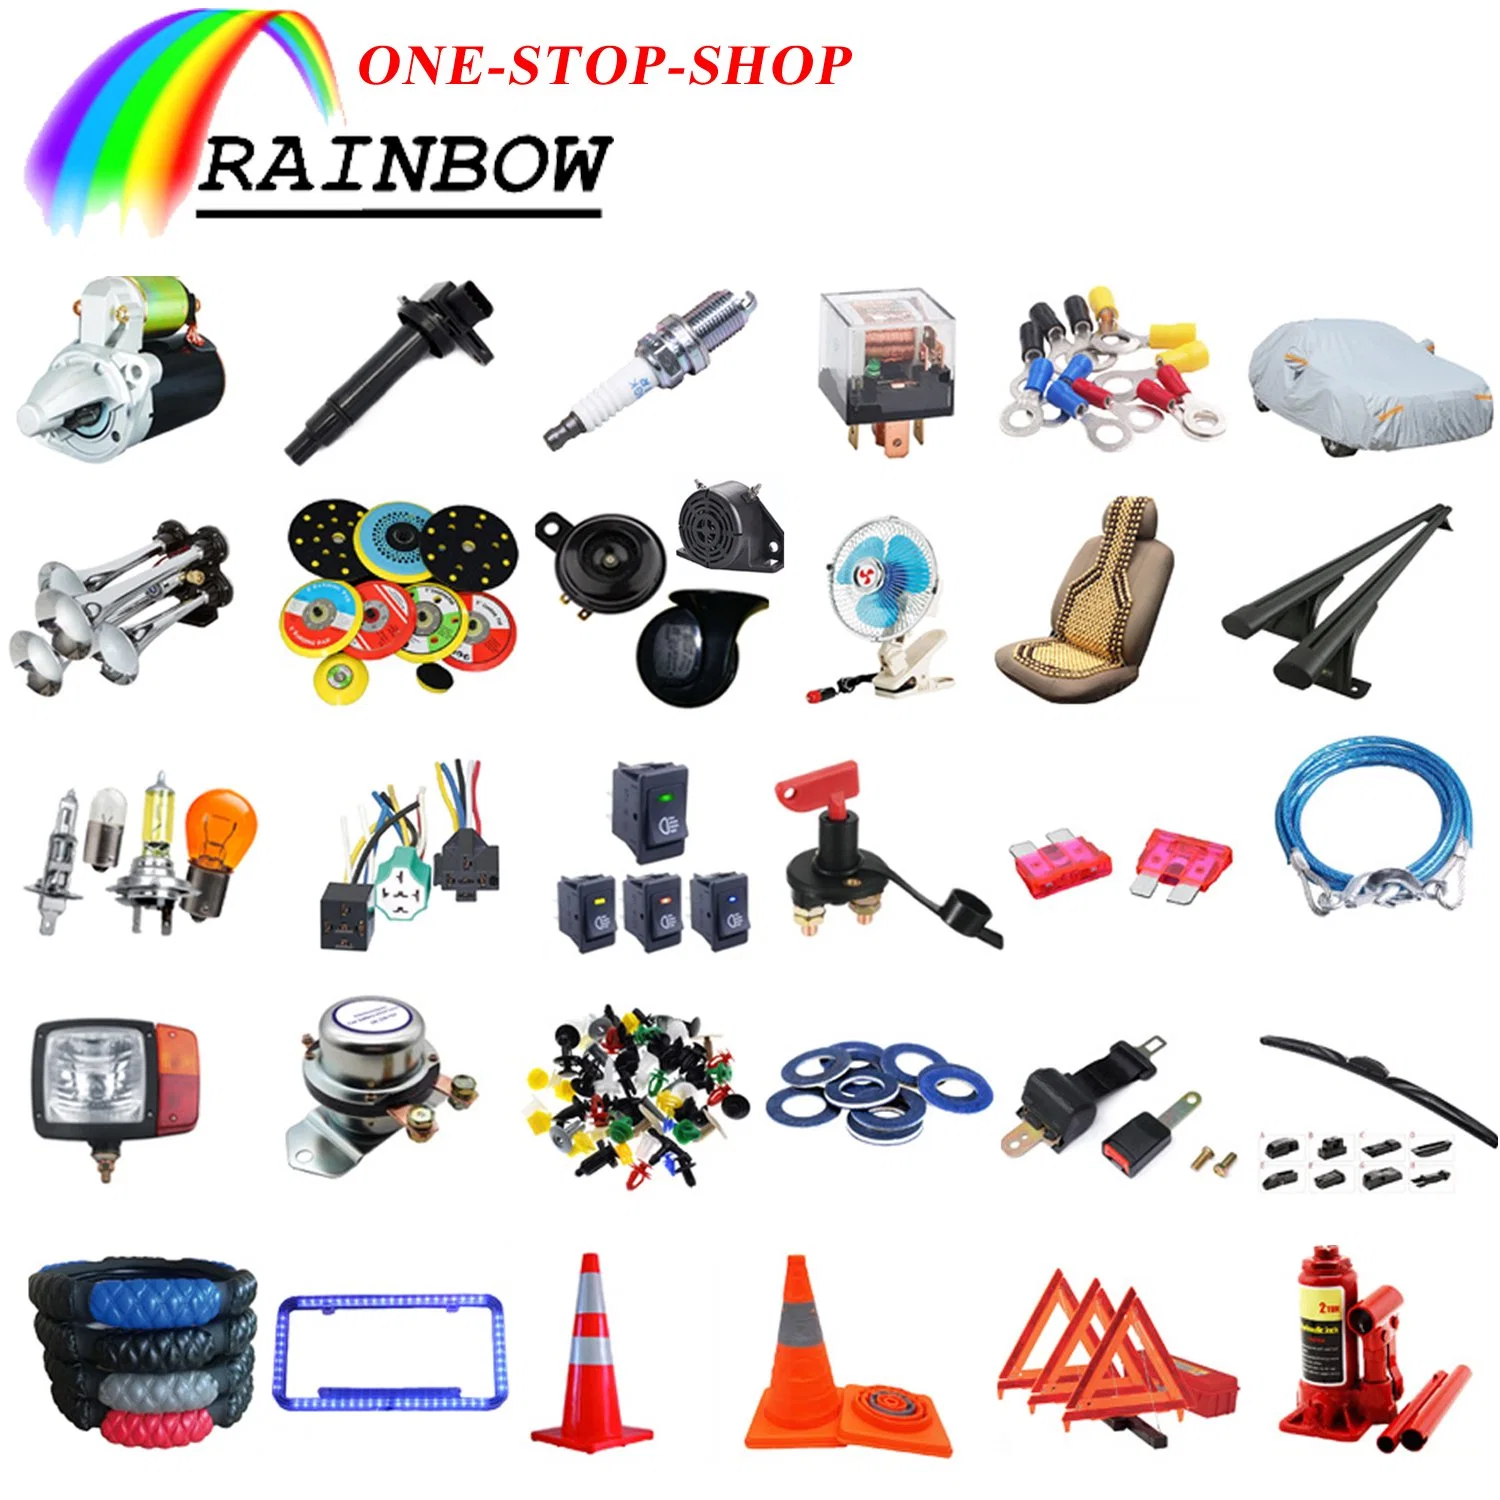 Factory Price Auto Car Part Horn/Relay/Spark Plug/Starter/Lamp/Bulb/Switch/Sanding Pad/Fan/Tow Rope/Traffic Cone/Cover/Safety Belt/Wiper/License Frame/Roof Rack